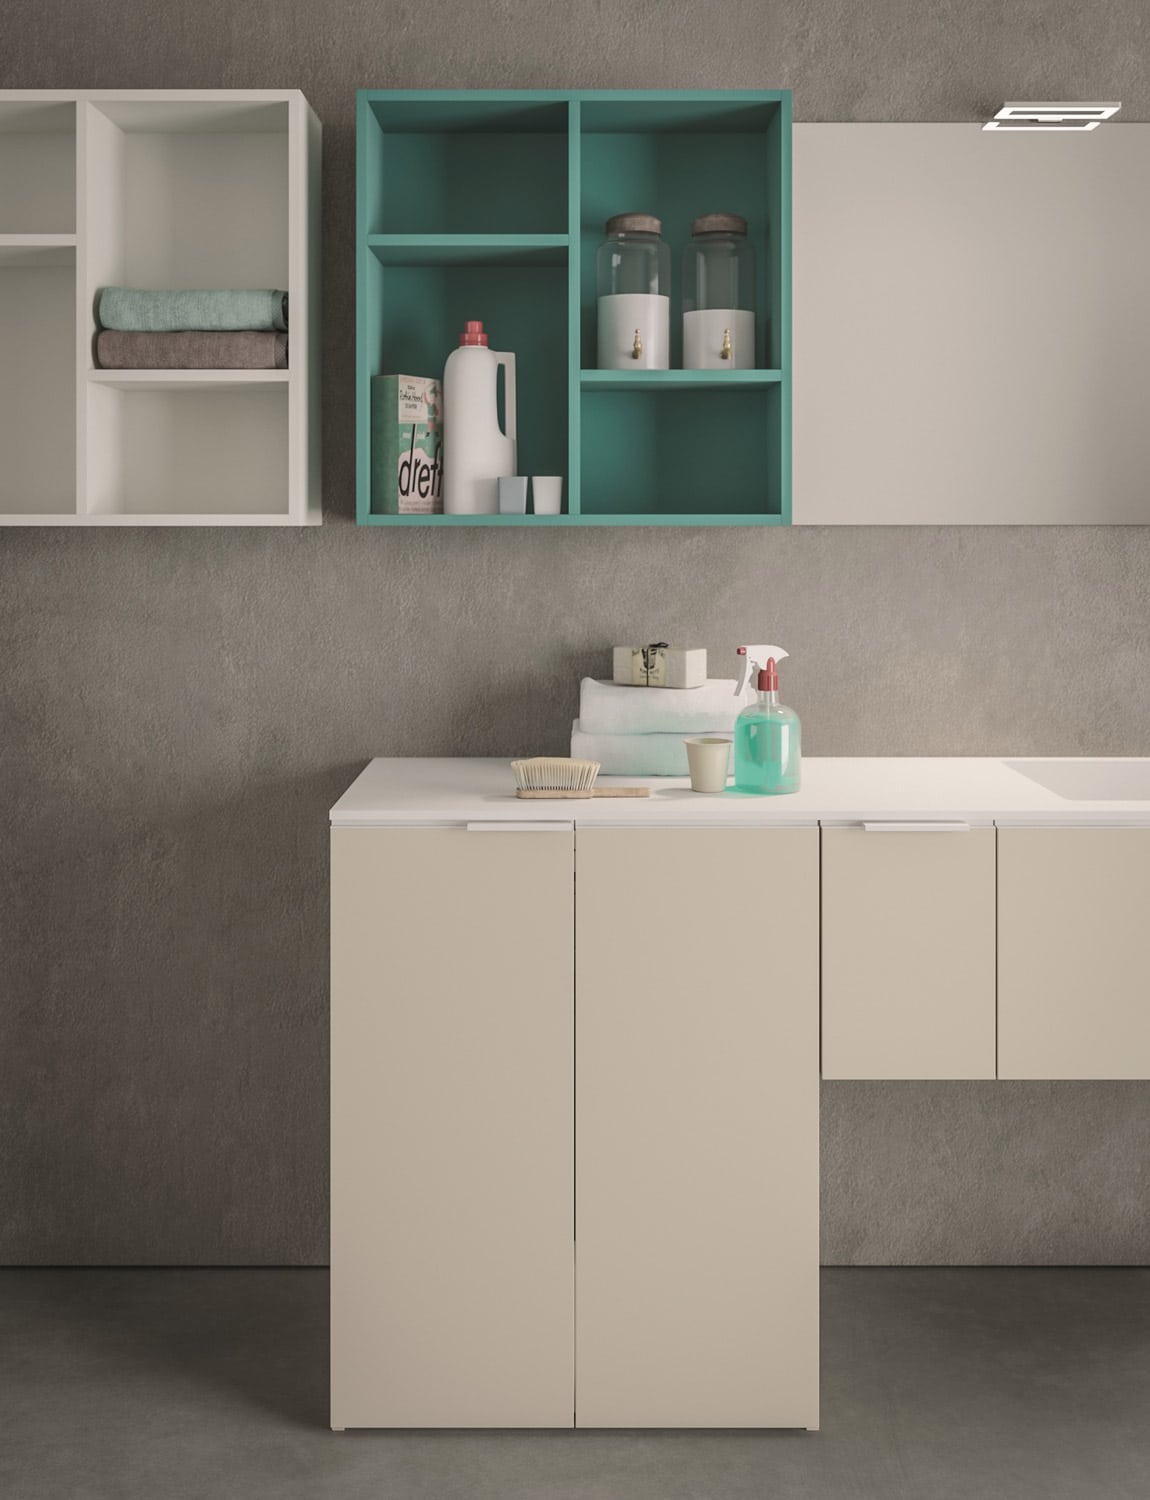 Base cabinet in Sabbia matte lacquer. Open shelving units in Verderame and White matte lacquer.